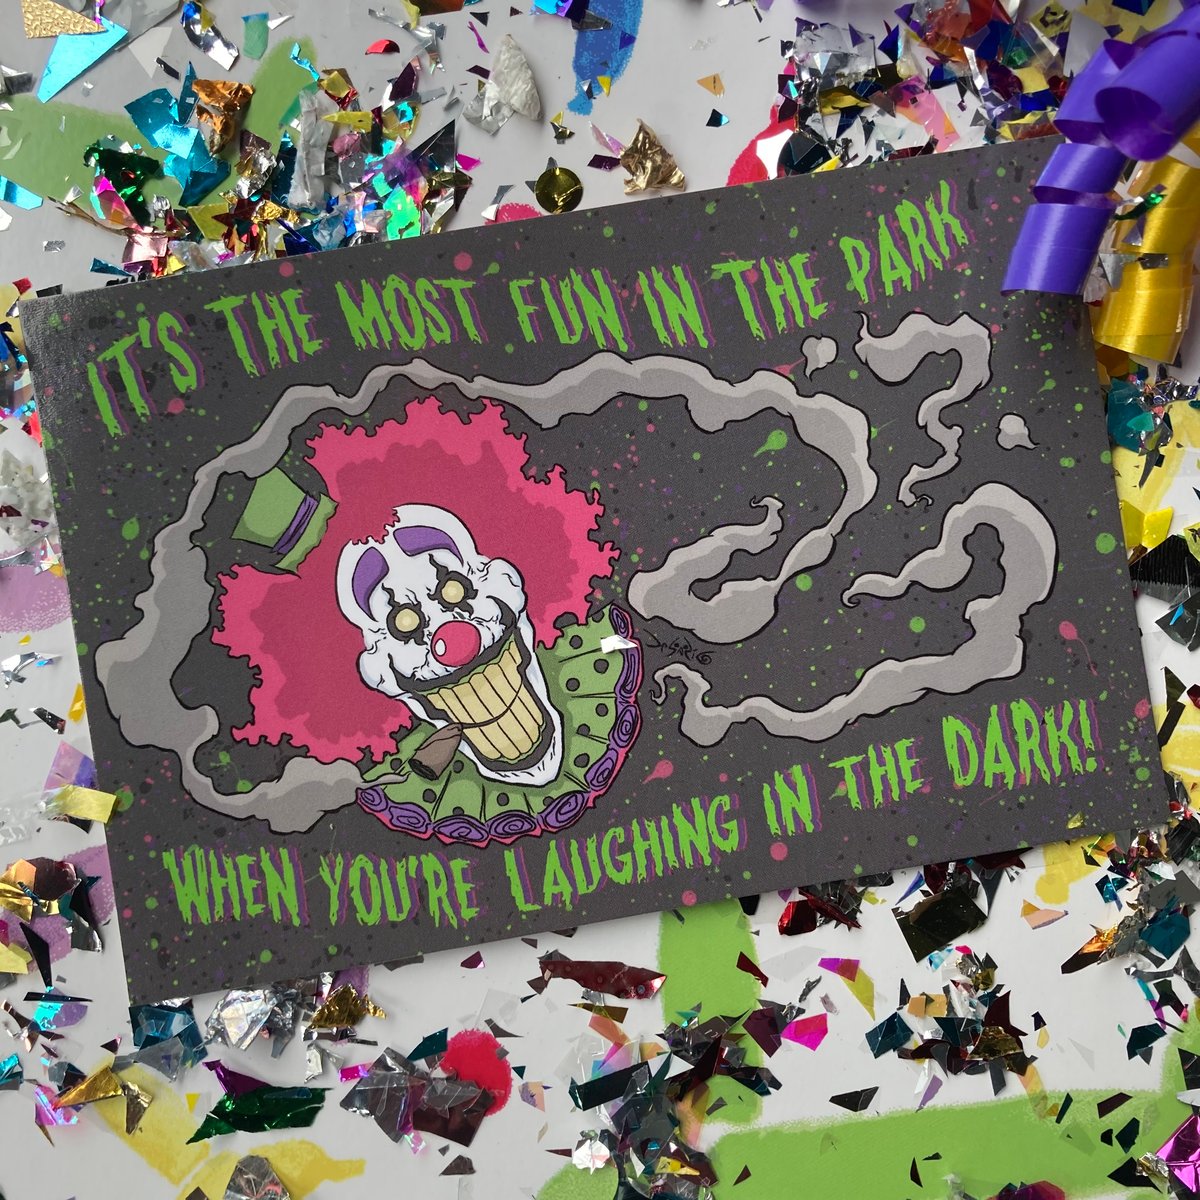 “Laughing In the Dark” Postcard